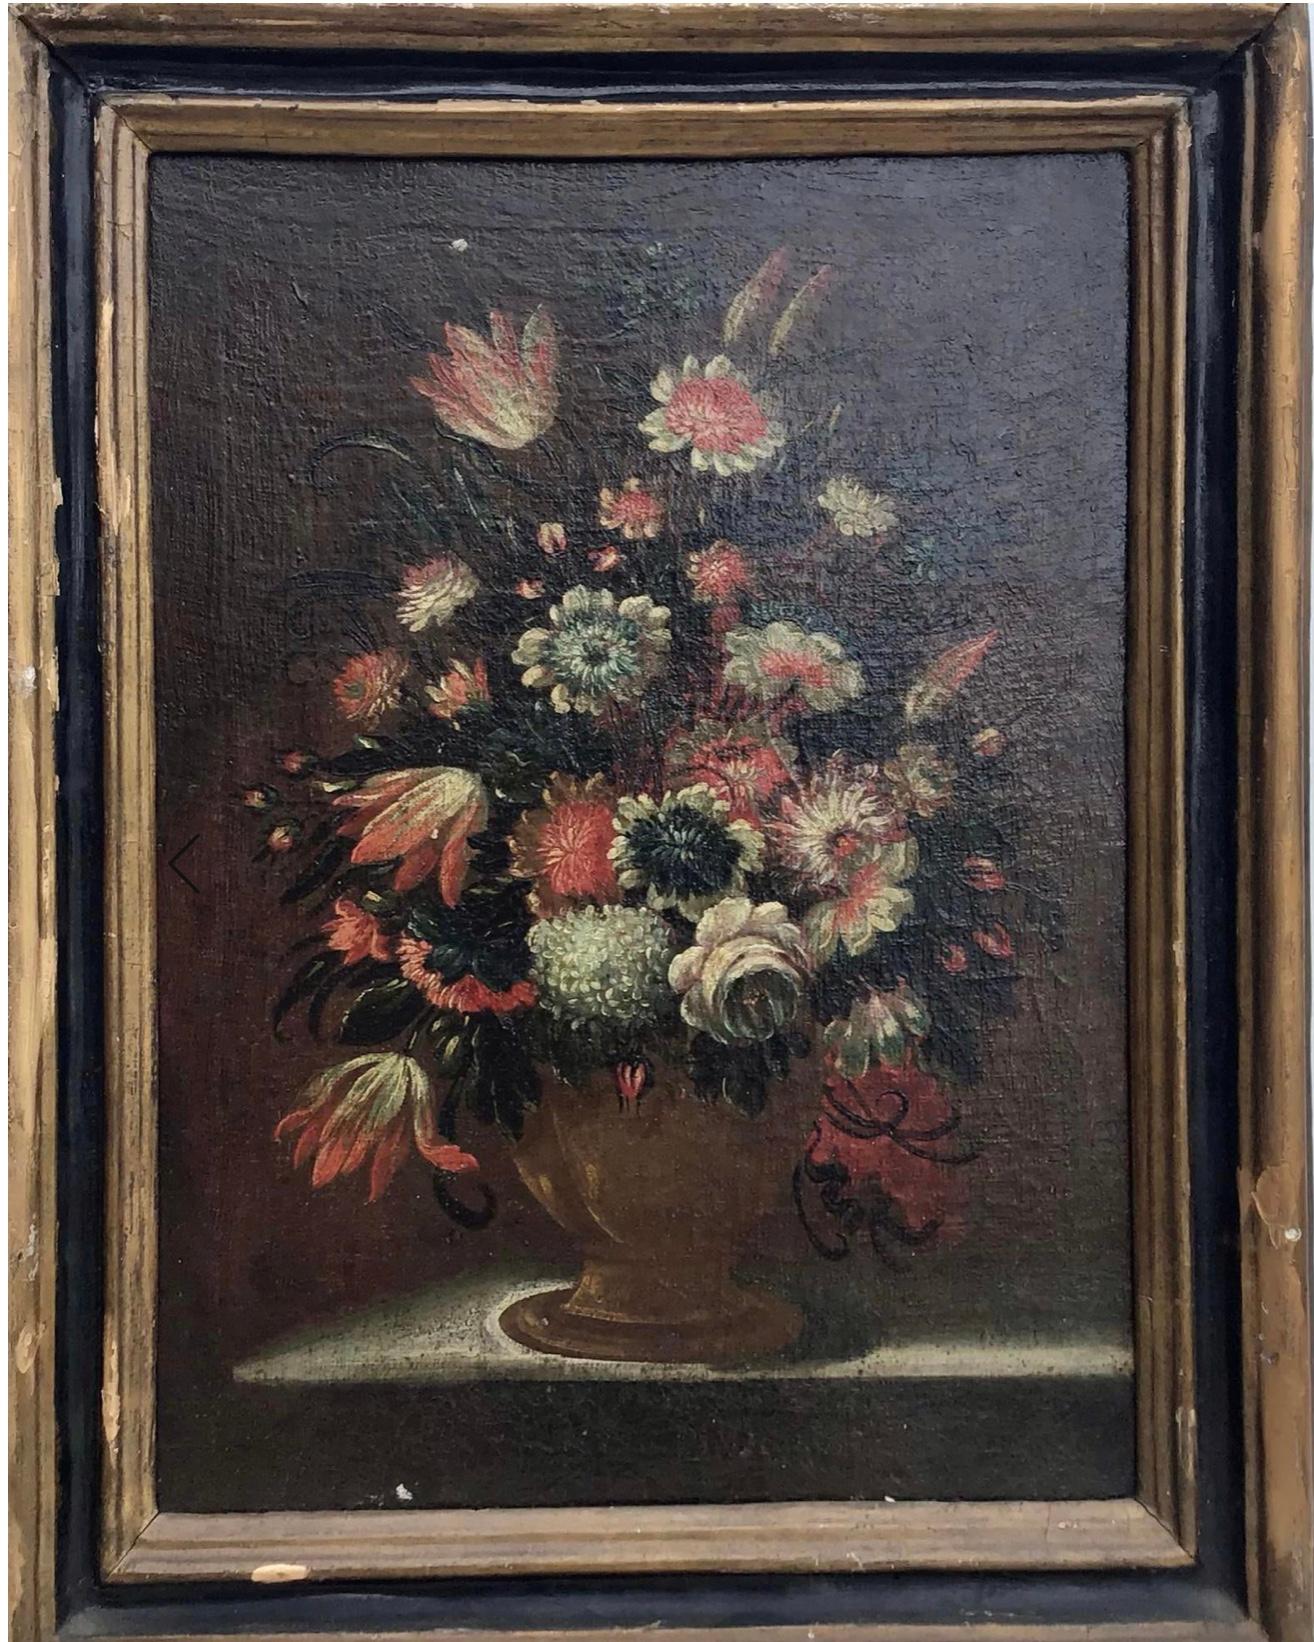 A Beautiful Italian Still Life oil painting on old canvas of a brass urn holding a bouquet of assorted flowers set on a ledge. 18th or 17th century. The painting is in good antique condition. Some spots of in painting and paint loss, craquelure, and